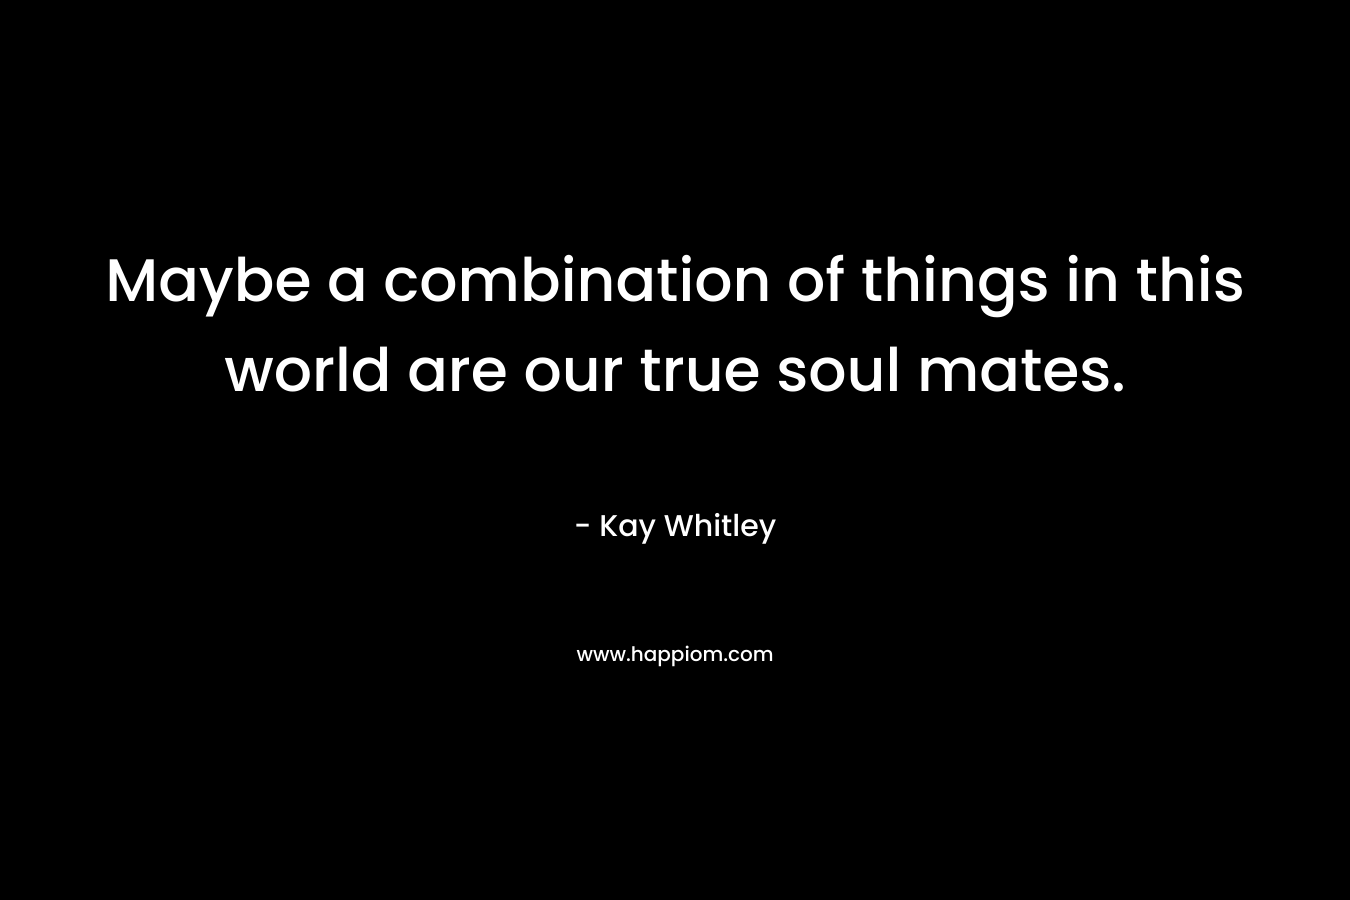 Maybe a combination of things in this world are our true soul mates.